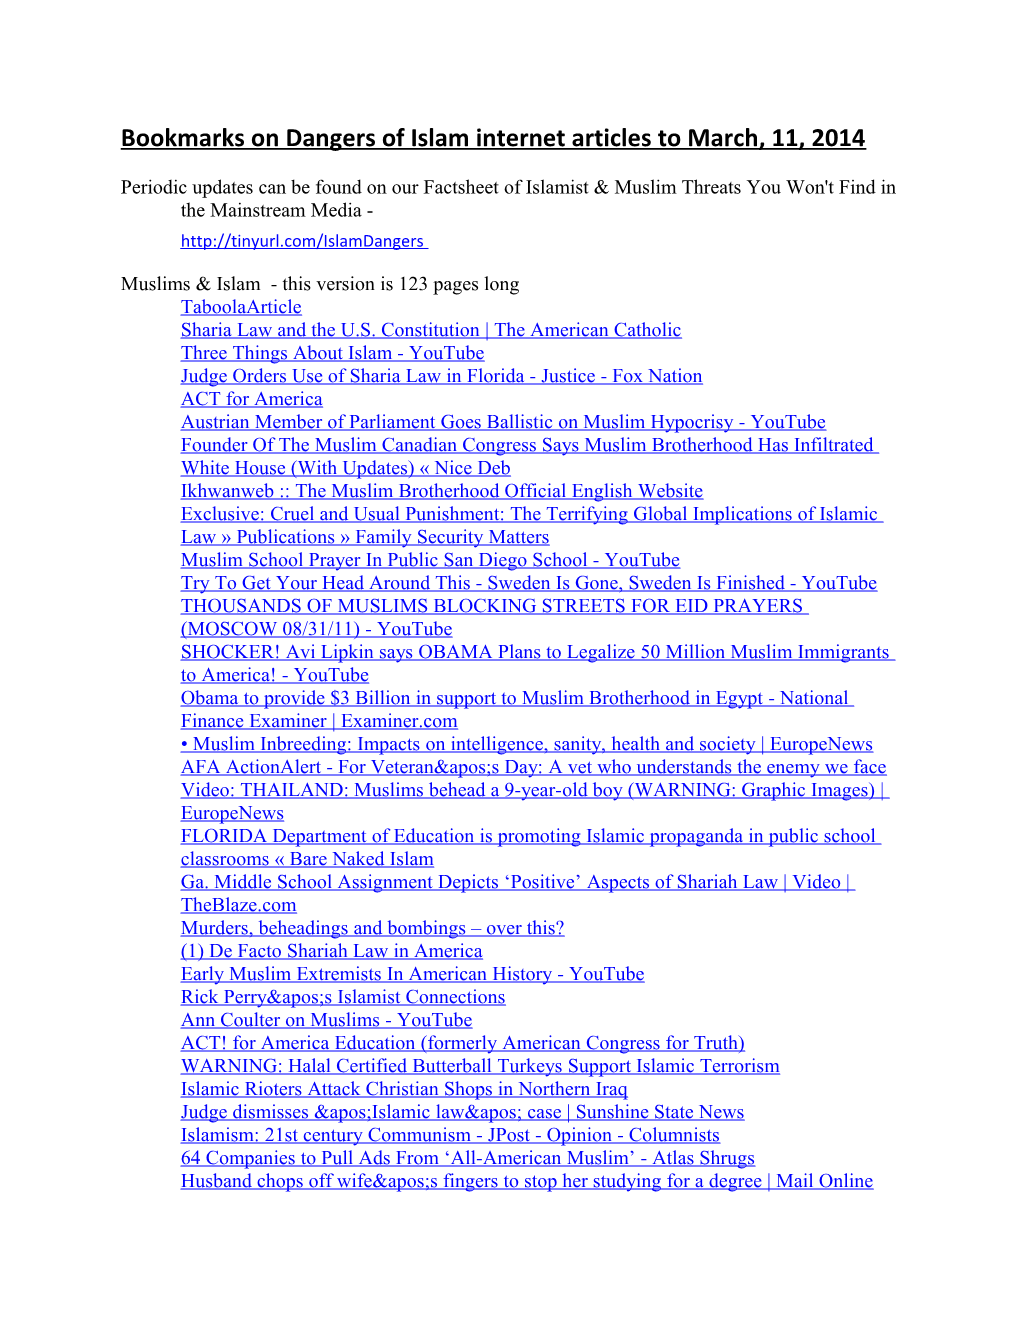 Bookmarks on Dangers of Islam Internet Articles to March, 11, 2014